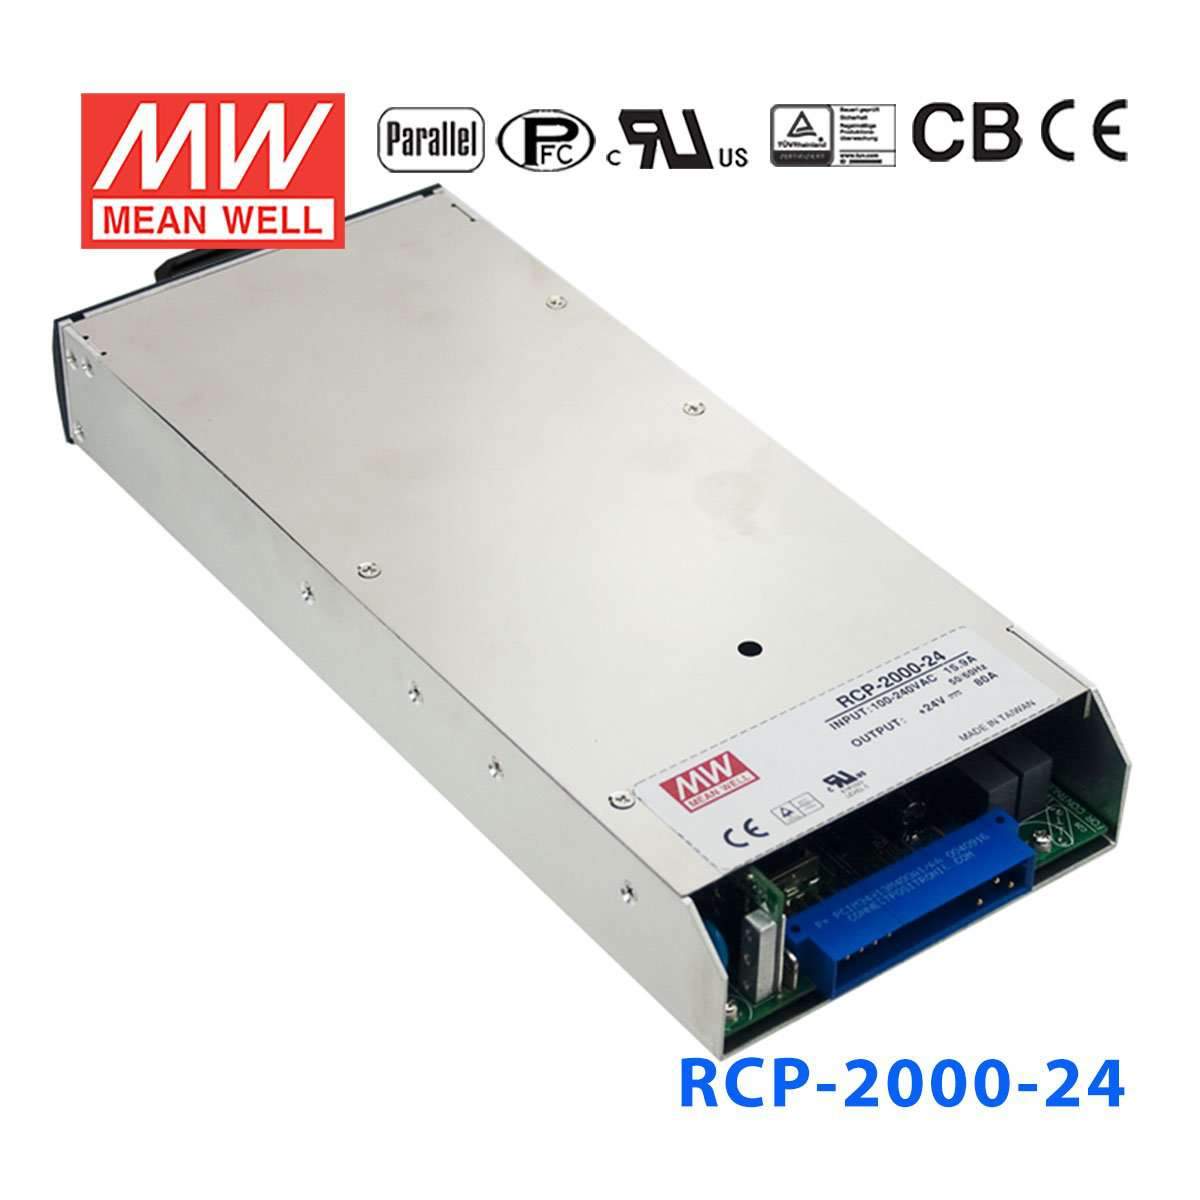 Mean Well RCP-2000-24 power supply 2000W 24V 80A